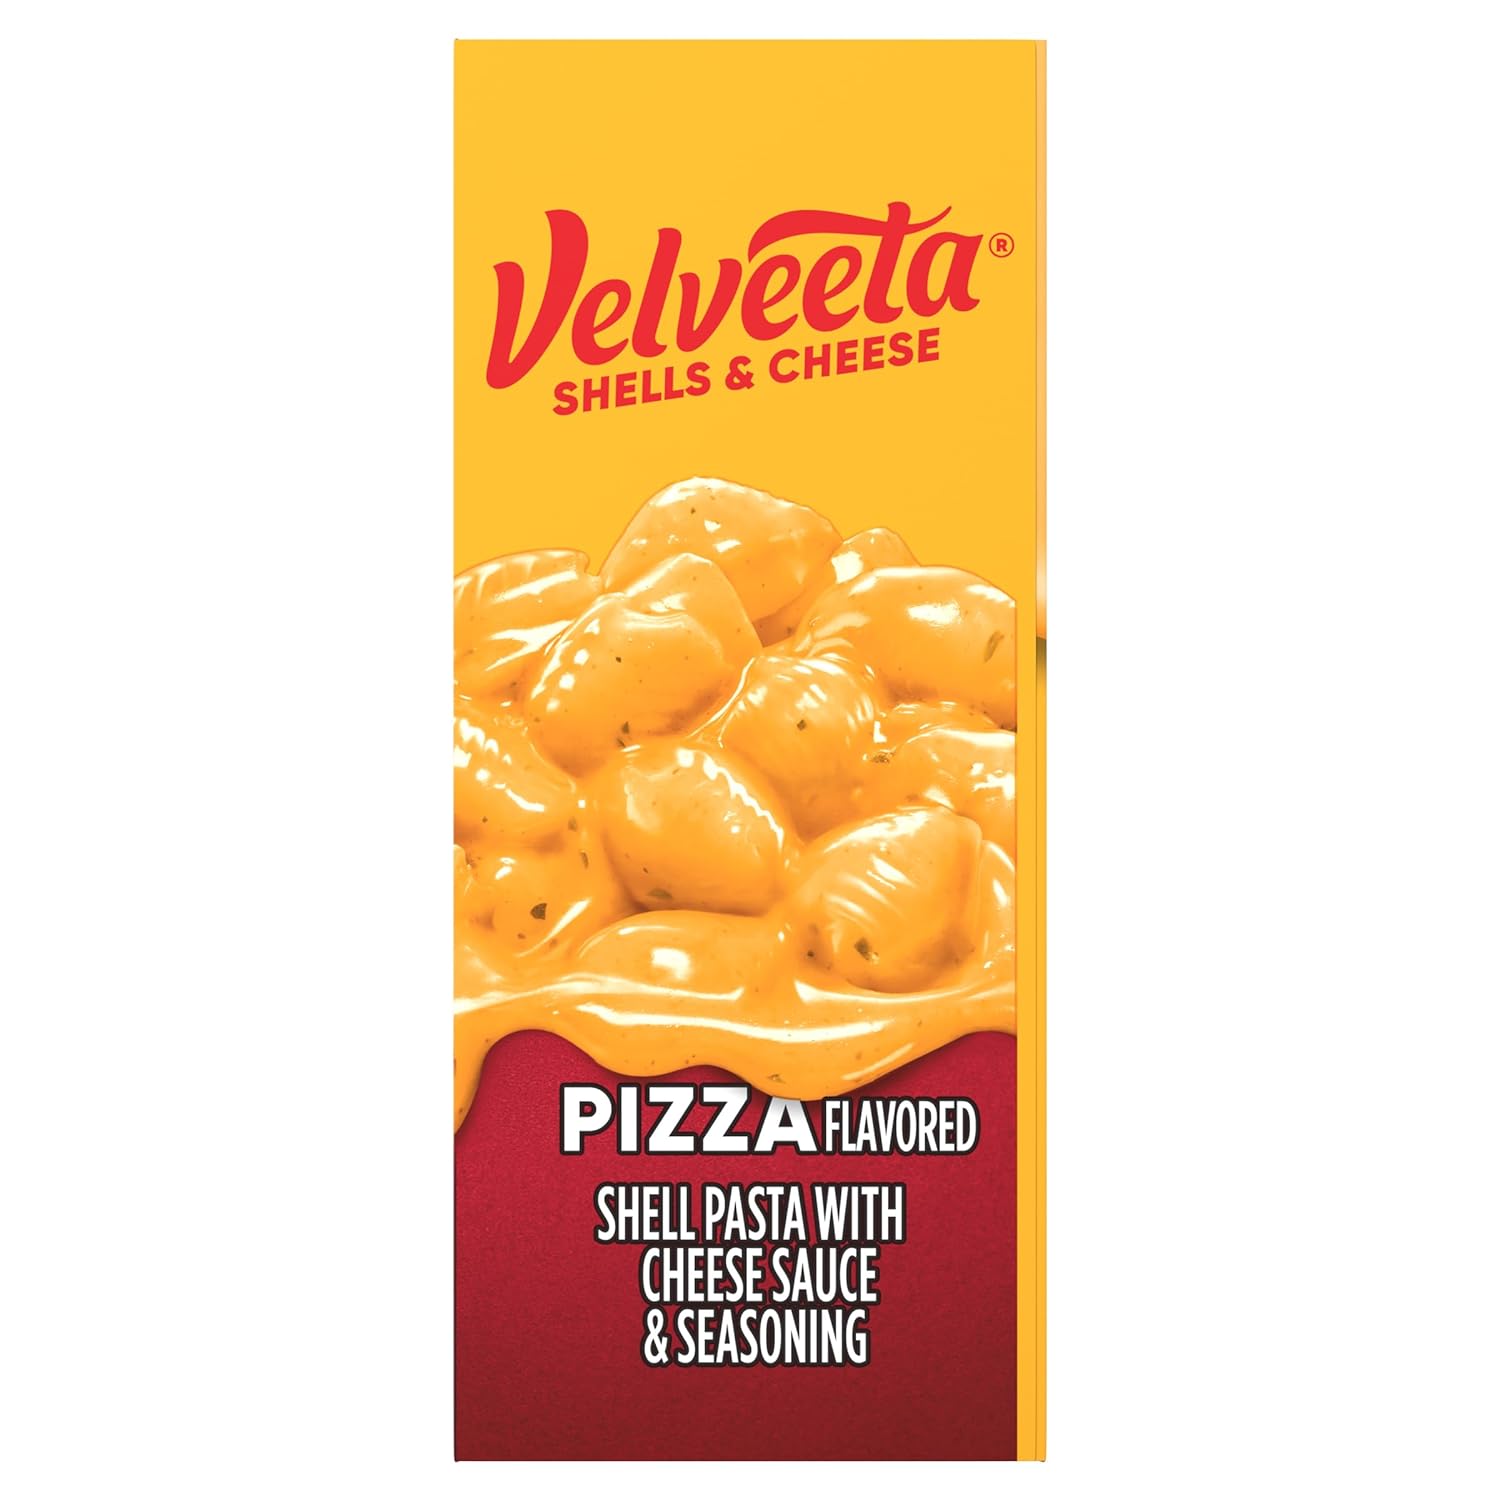 Velveeta Pizza Flavored Shells & Cheese with Shell Pasta, Cheese Sauce and Seasoning, 10.9 oz Box : Everything Else